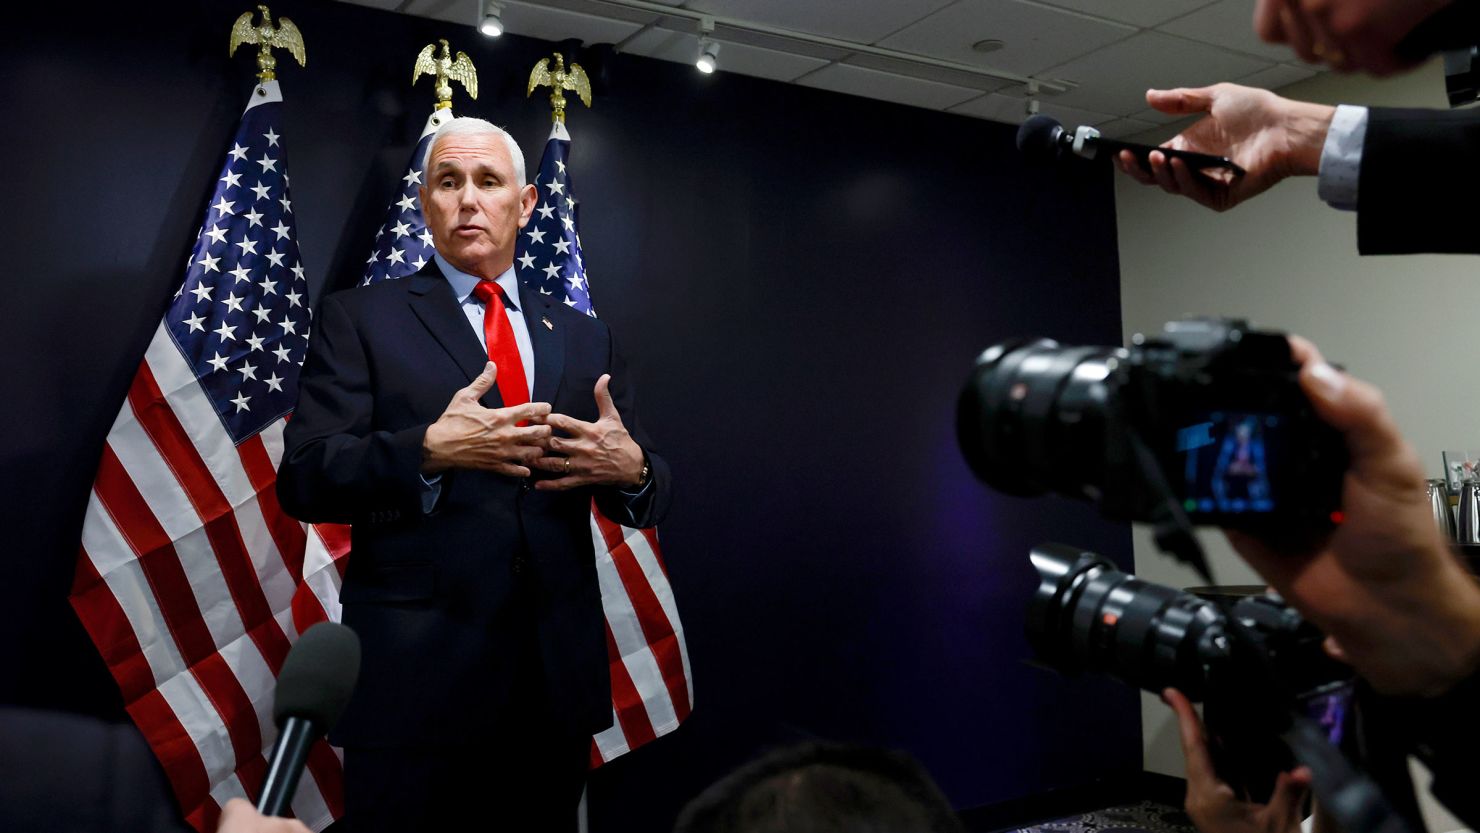 In this September 15 photo, former Vice President Mike Pence speaks to reporters after his remarks at the Pray Vote Stand Summit at the Omni Shoreham Hotel in Washington, DC.